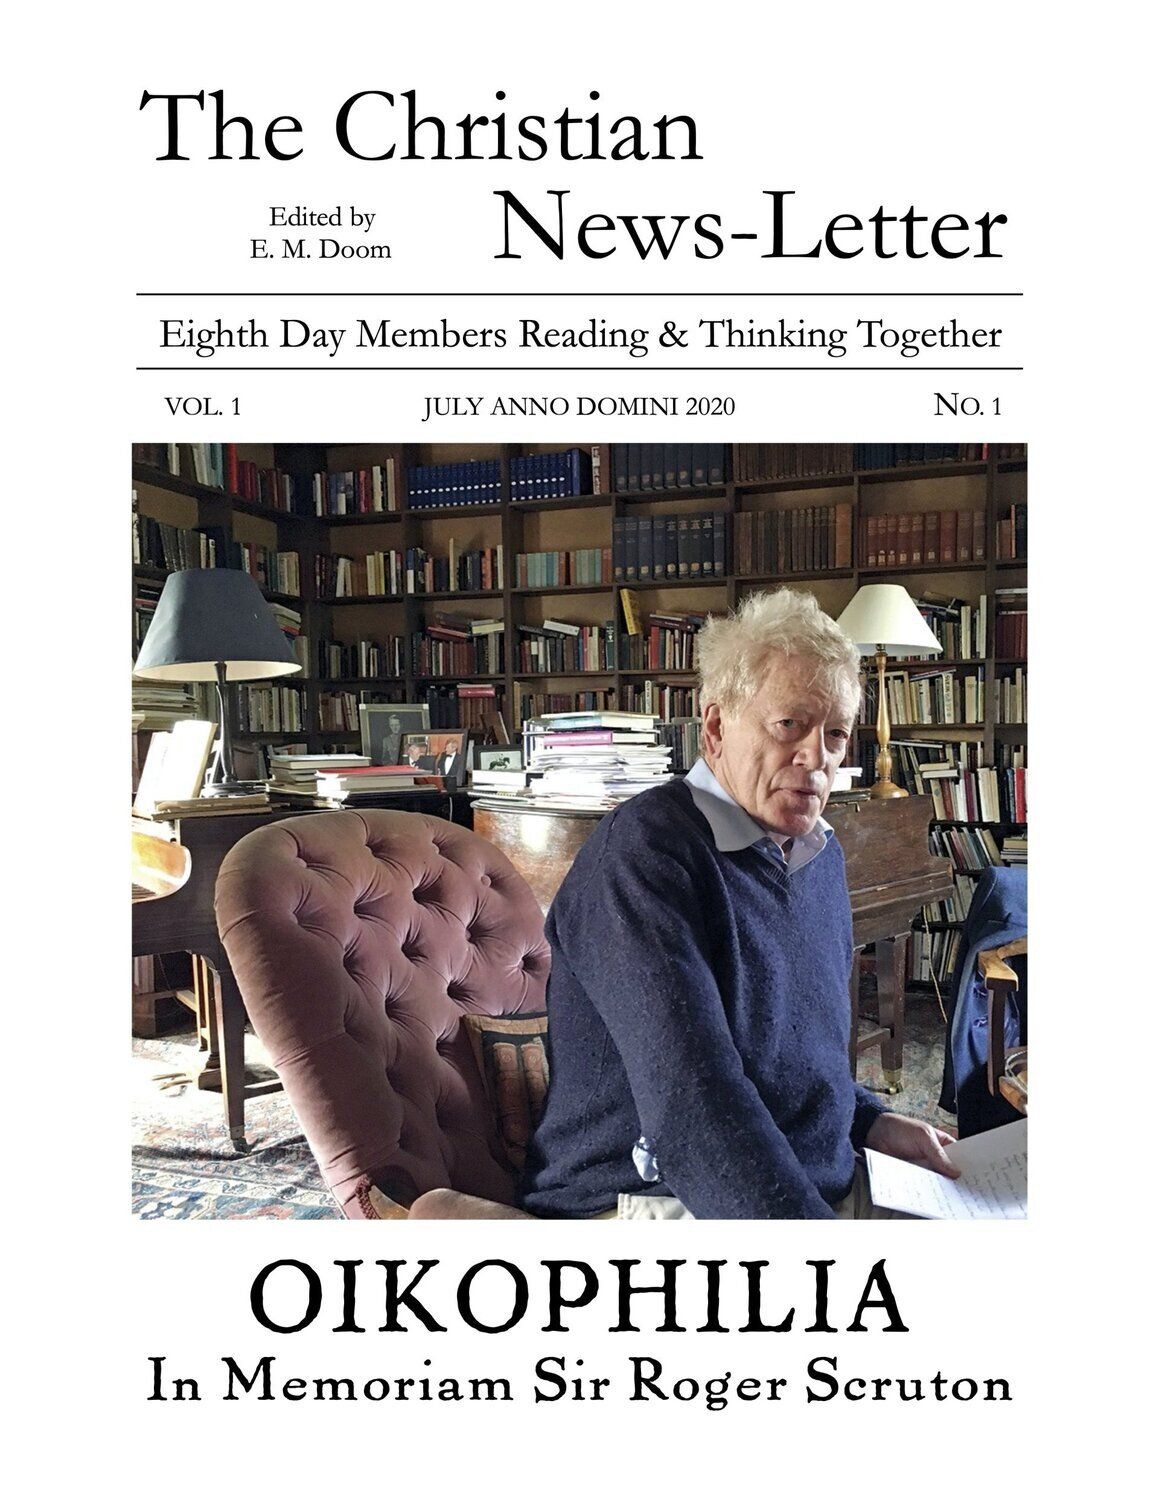 Front cover of the Christian News-letter.